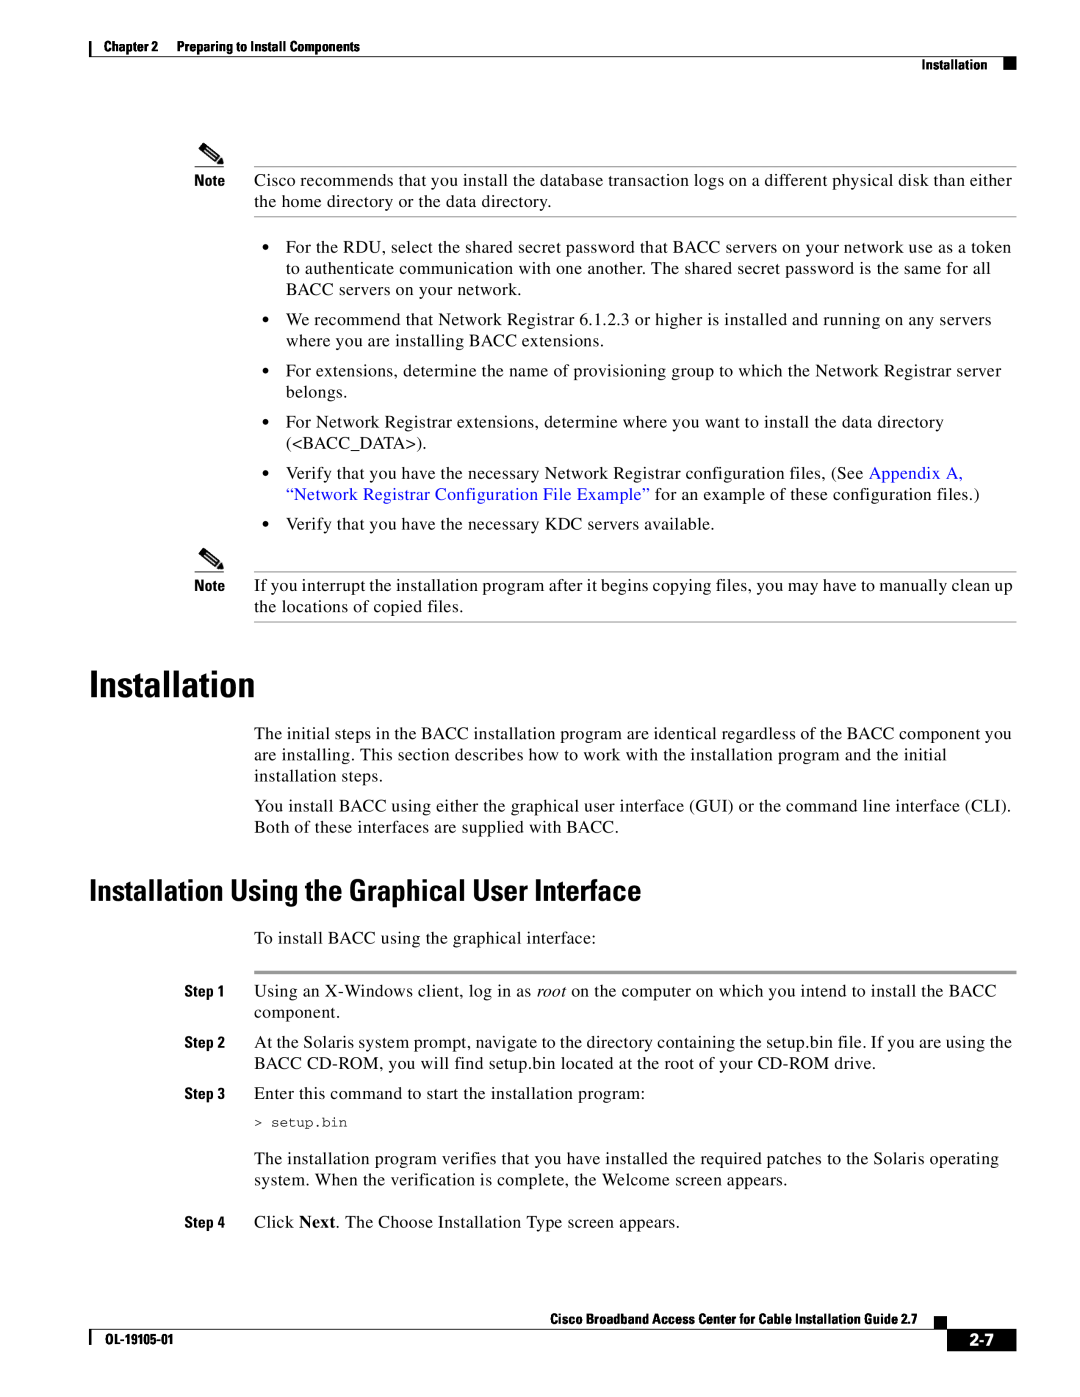 Cisco Systems Broadband Access Center manual Installation Using the Graphical User Interface 